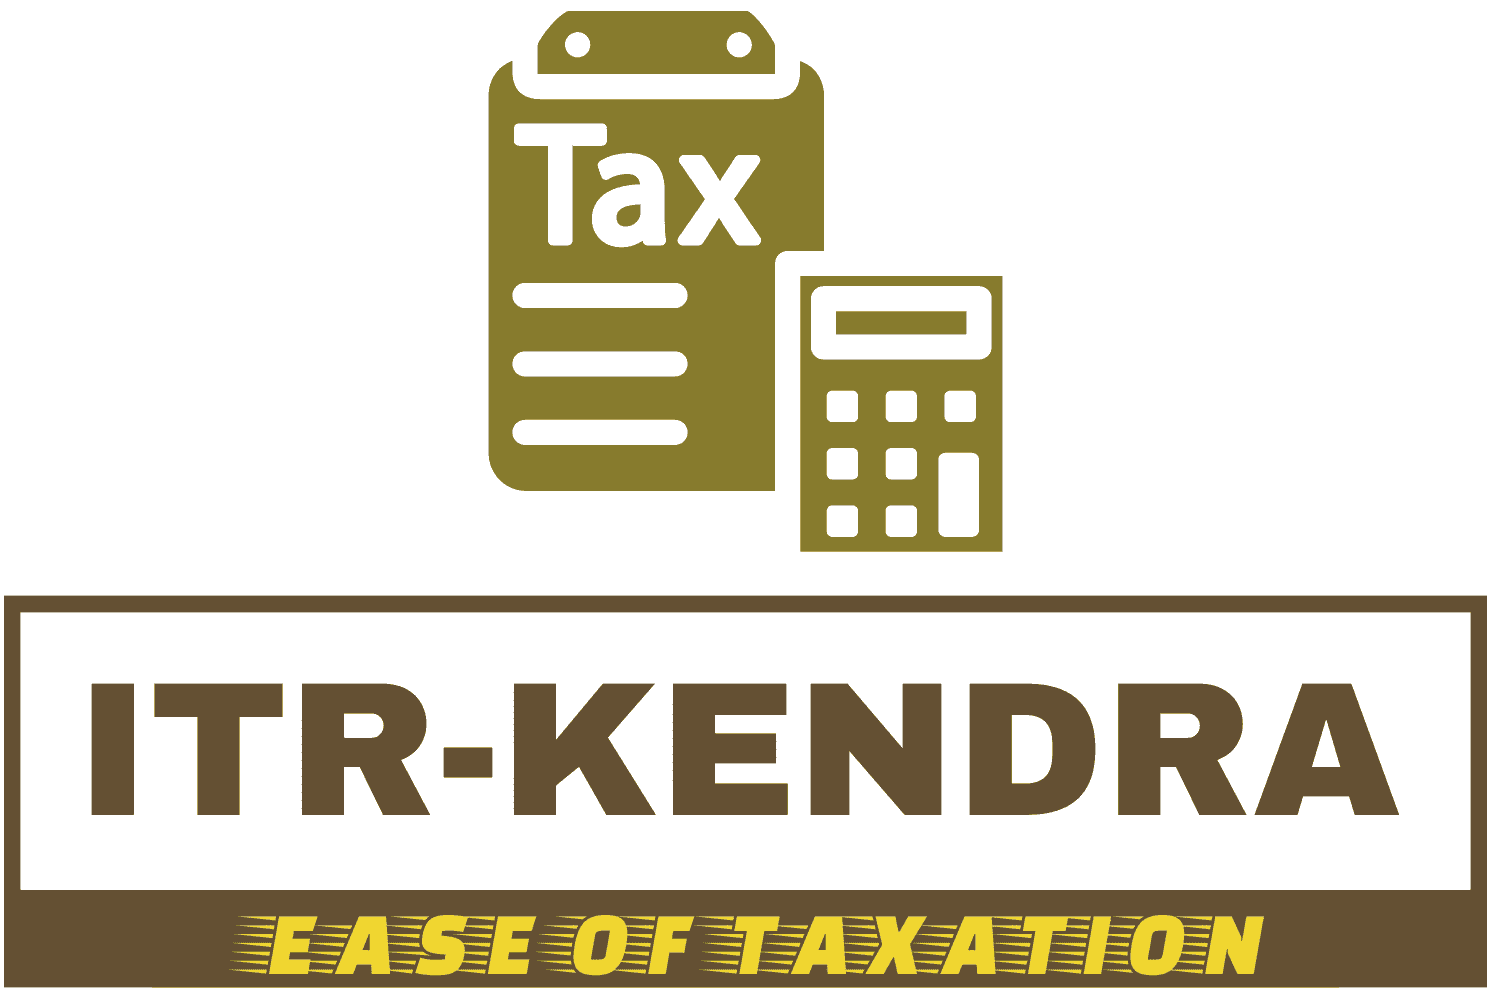 Land Transfer Tax in Canada - How Much is It? Tax Calculator and Rules